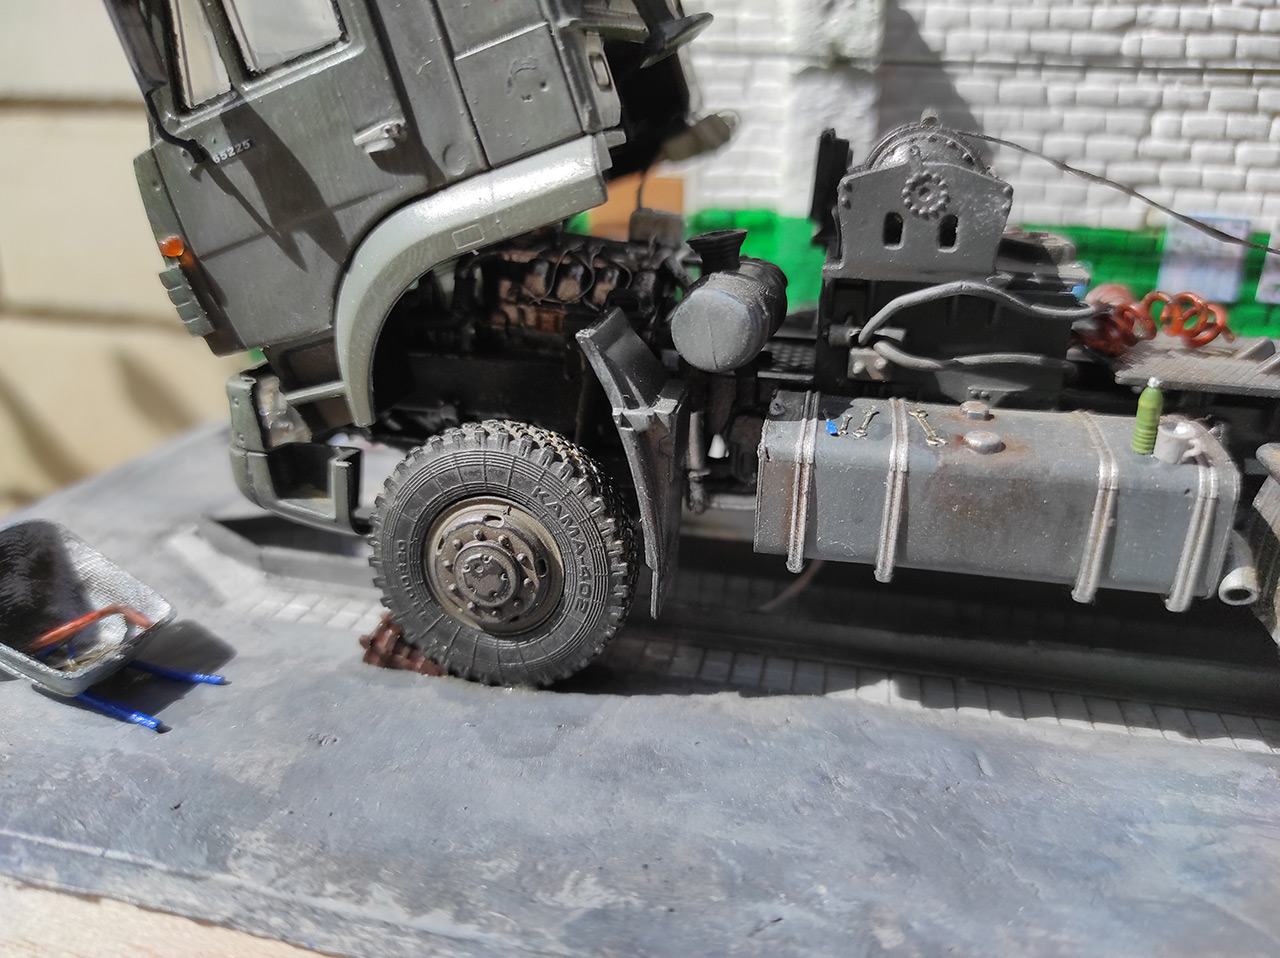 Dioramas and Vignettes: In the garage, photo #11